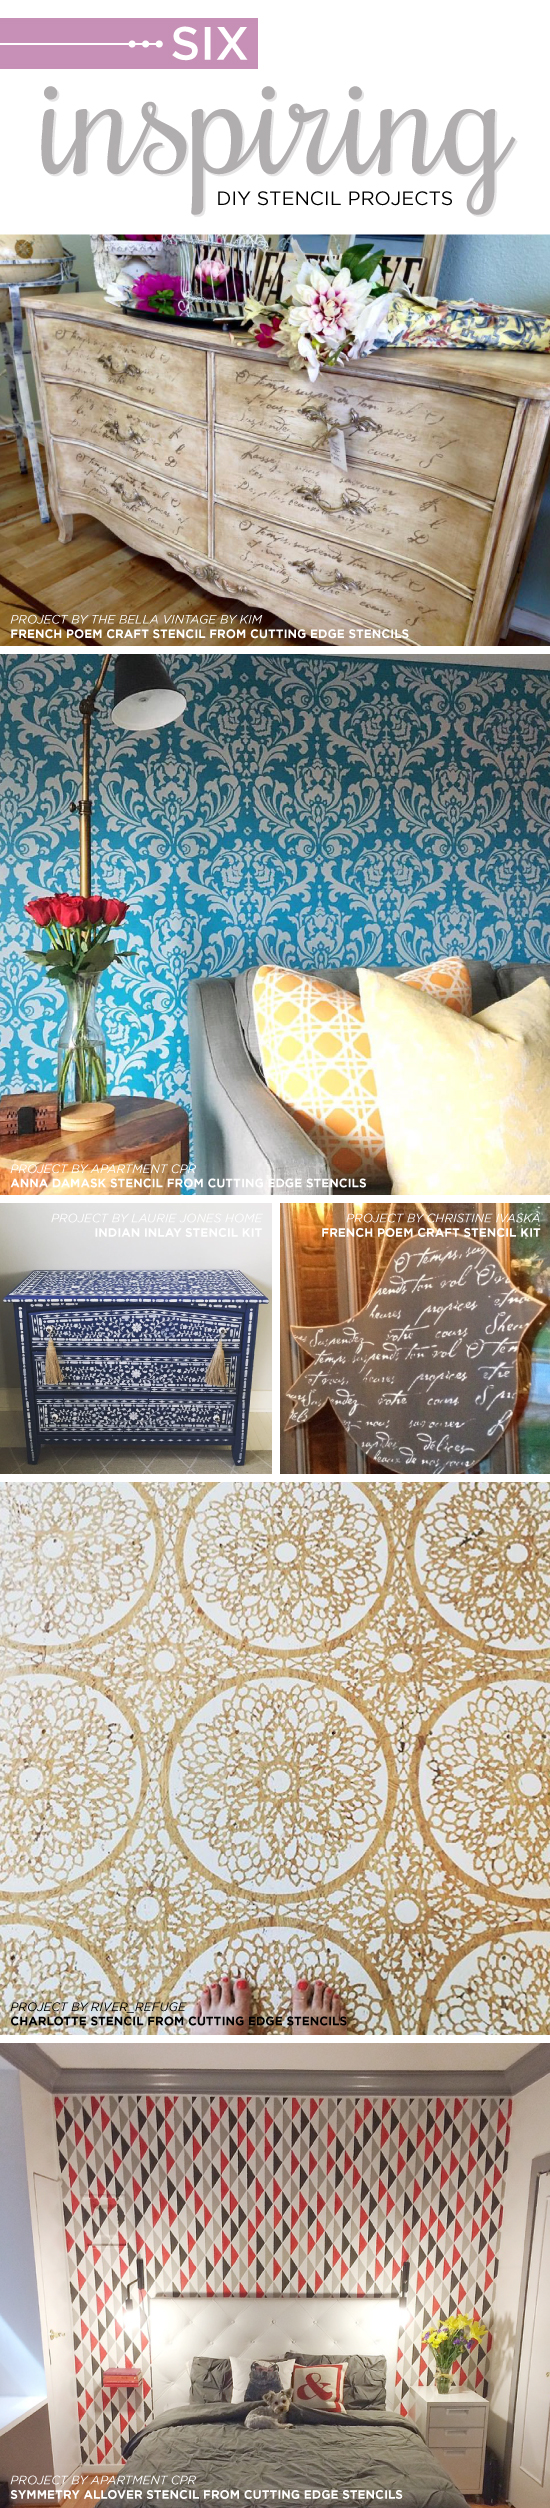 Cutting Edge Stencils shares DIY home decorating projects that are fun and easy to complete using stencil patterns. http://www.cuttingedgestencils.com/wall-stencils-stencil-designs.html